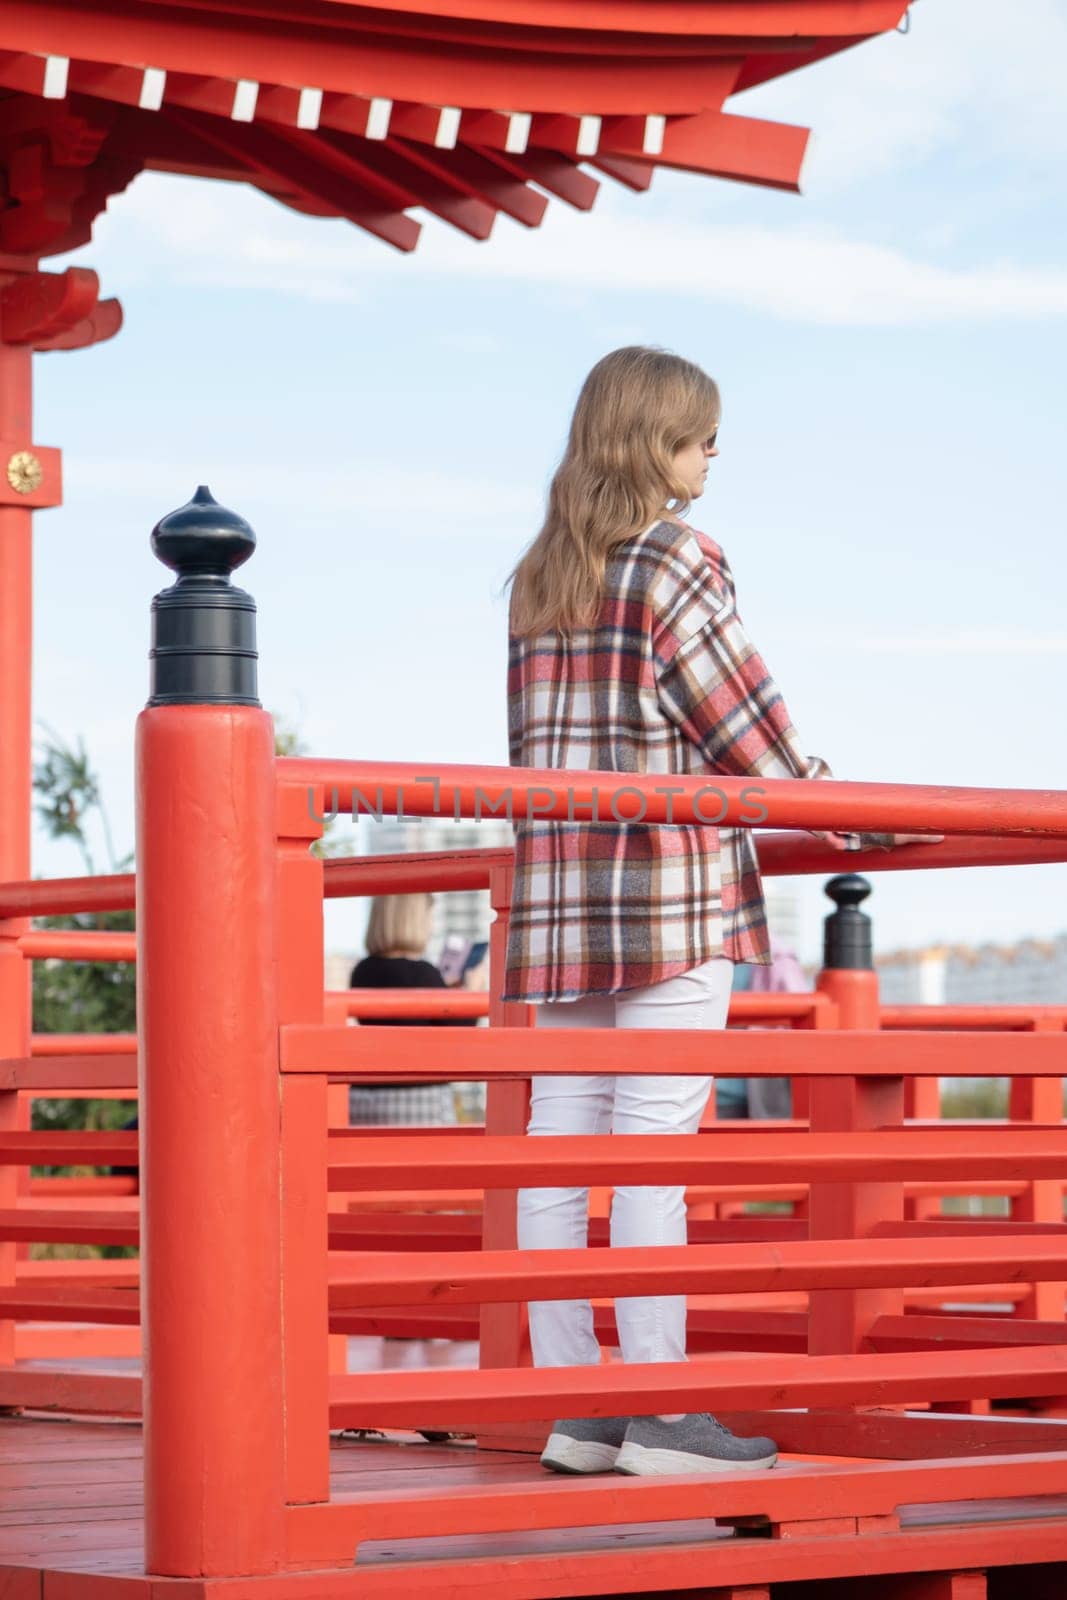 back view of unrecognizable Woman in red plaid shirt enjoying nature walking in Japanese Garden with red pagoda